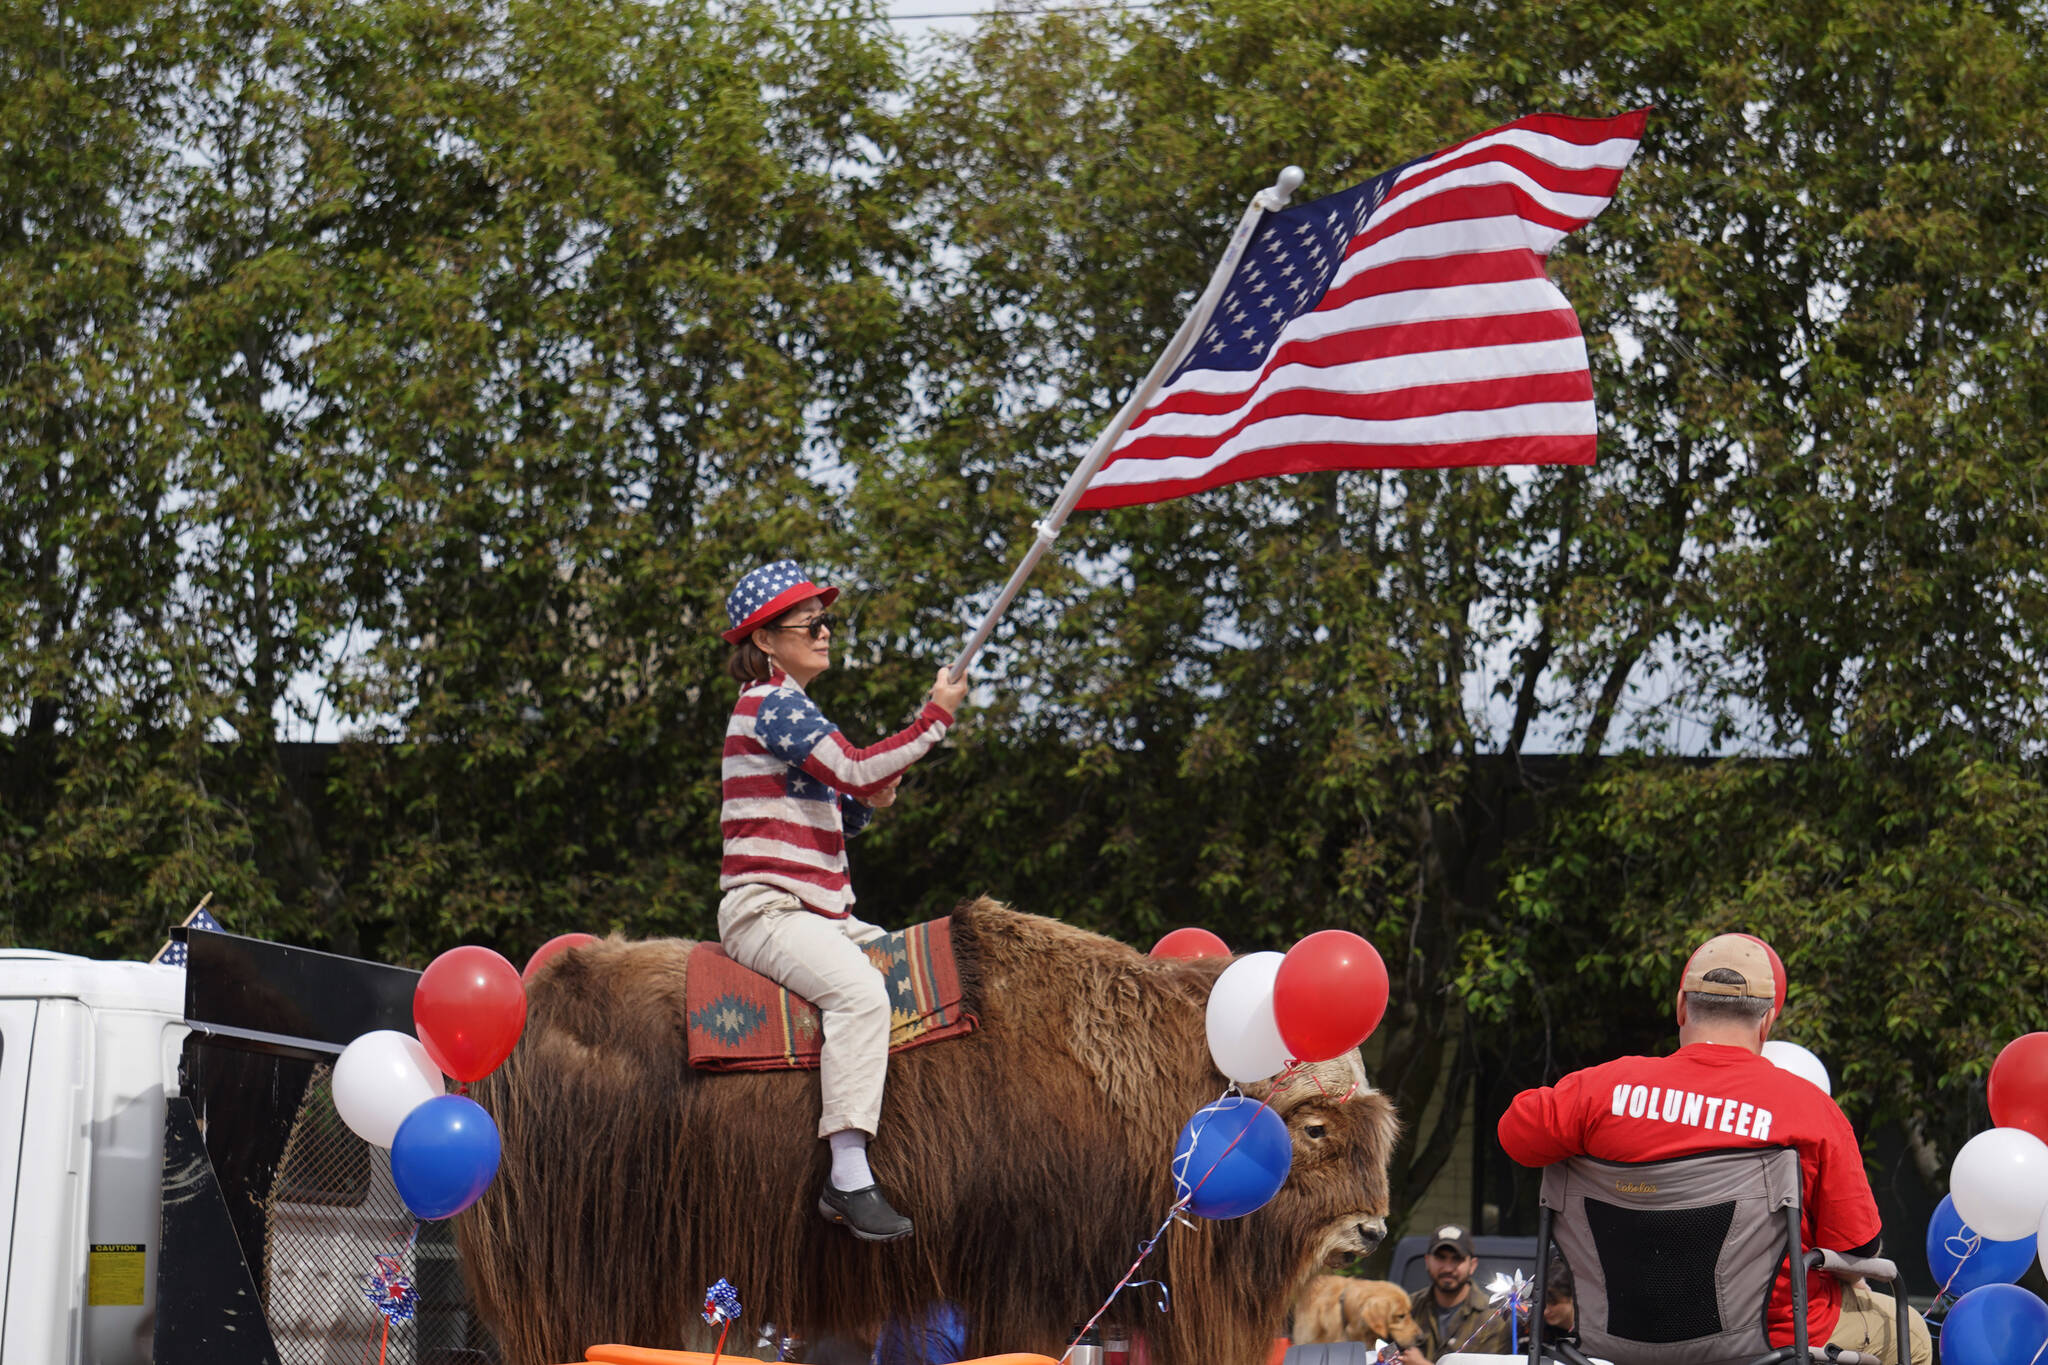 A woman waves a flag from atop a large animal as part of the Fourth of July Parade down the Kenai Spur Highway in Kenai, Alaska on Tuesday, July 4, 2023. (Jake Dye/Peninsula Clarion)